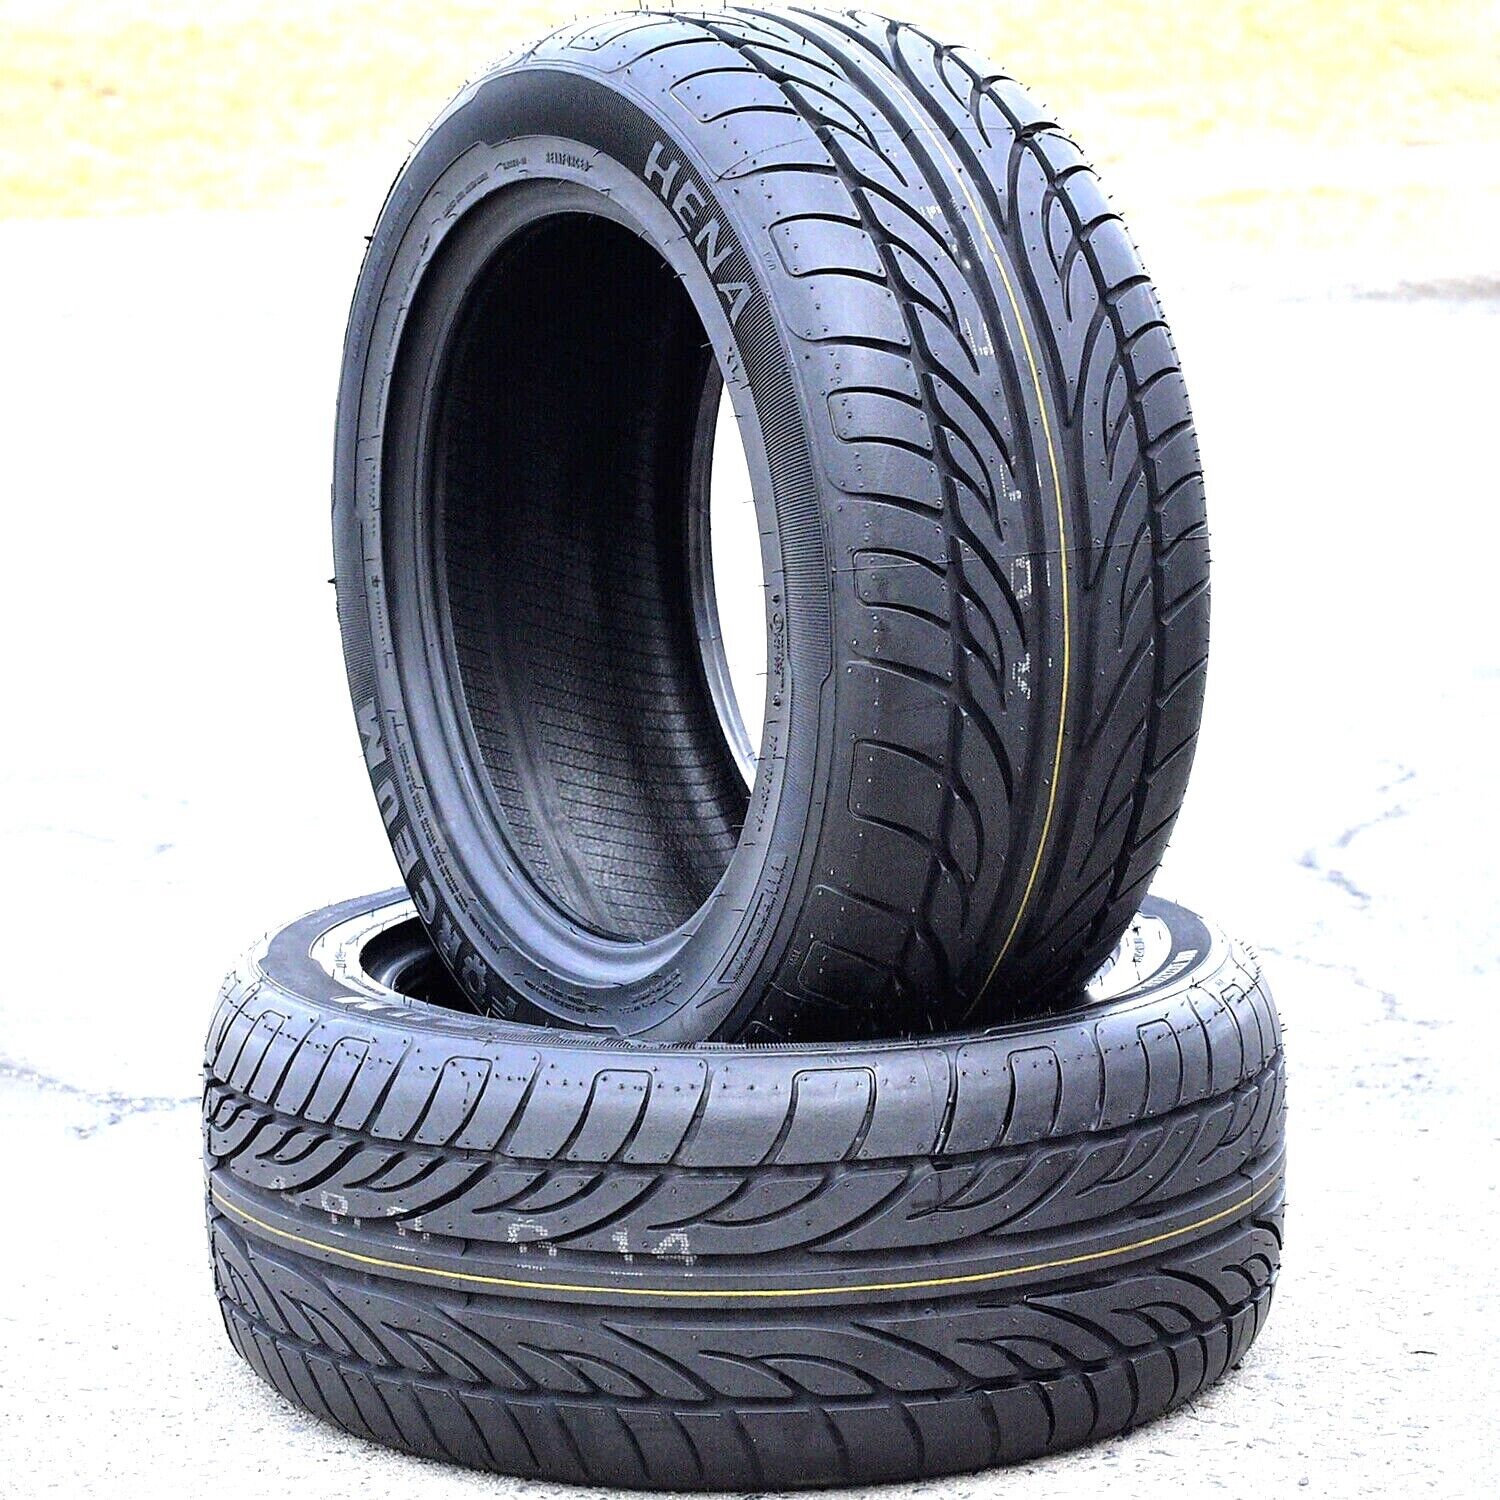 2 Tires Forceum Hena Steel Belted 205/45R16 ZR 87W XL AS A/S High Performance